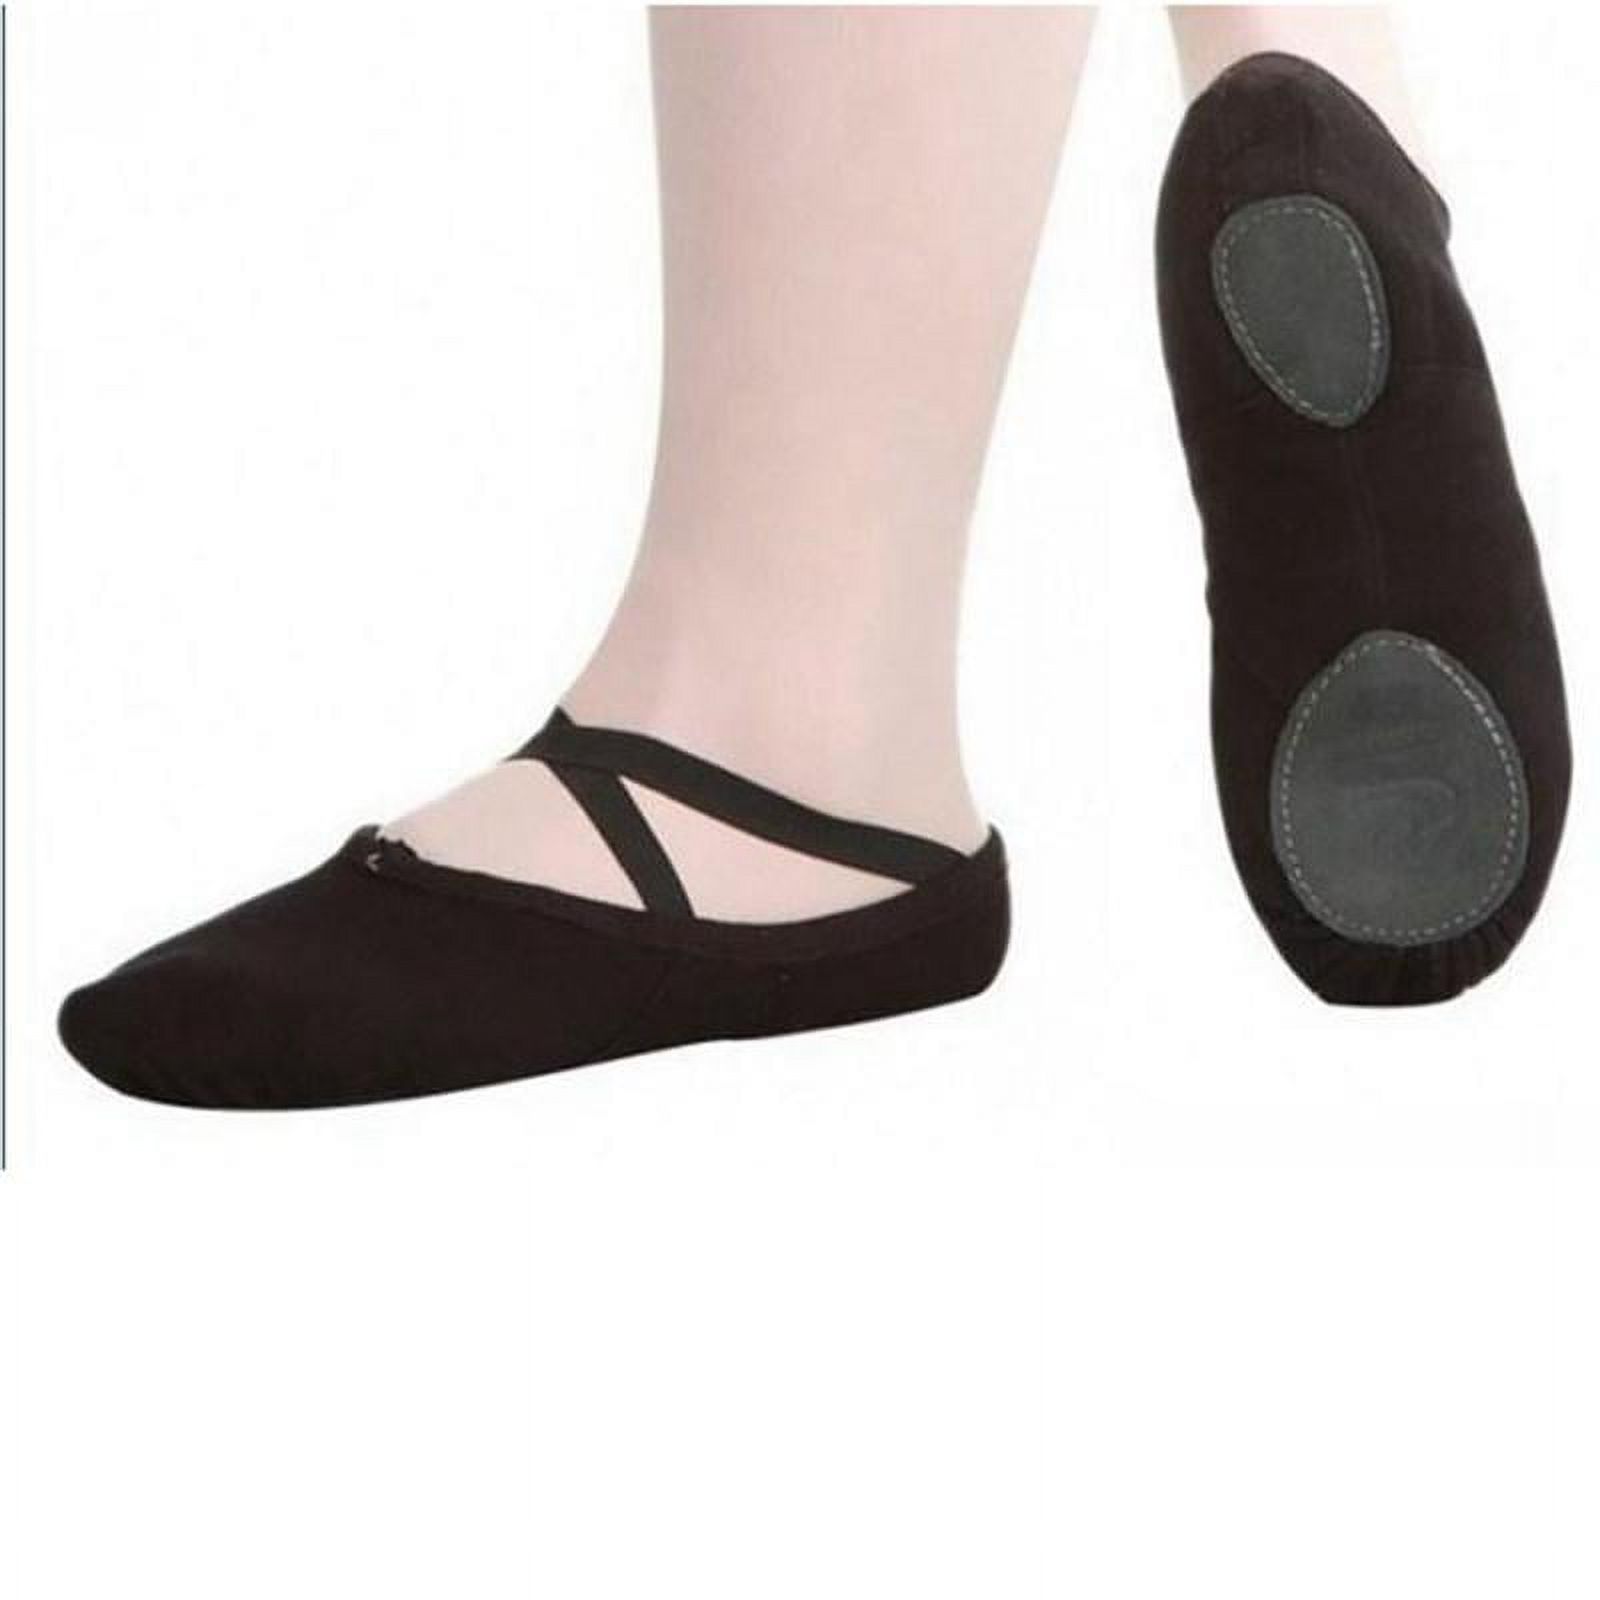 MELLCO Ballet Shoes for Women Girls, Women's Ballet Slipper Dance Shoes Canvas Ballet Shoes Yoga Shoes - image 1 of 3